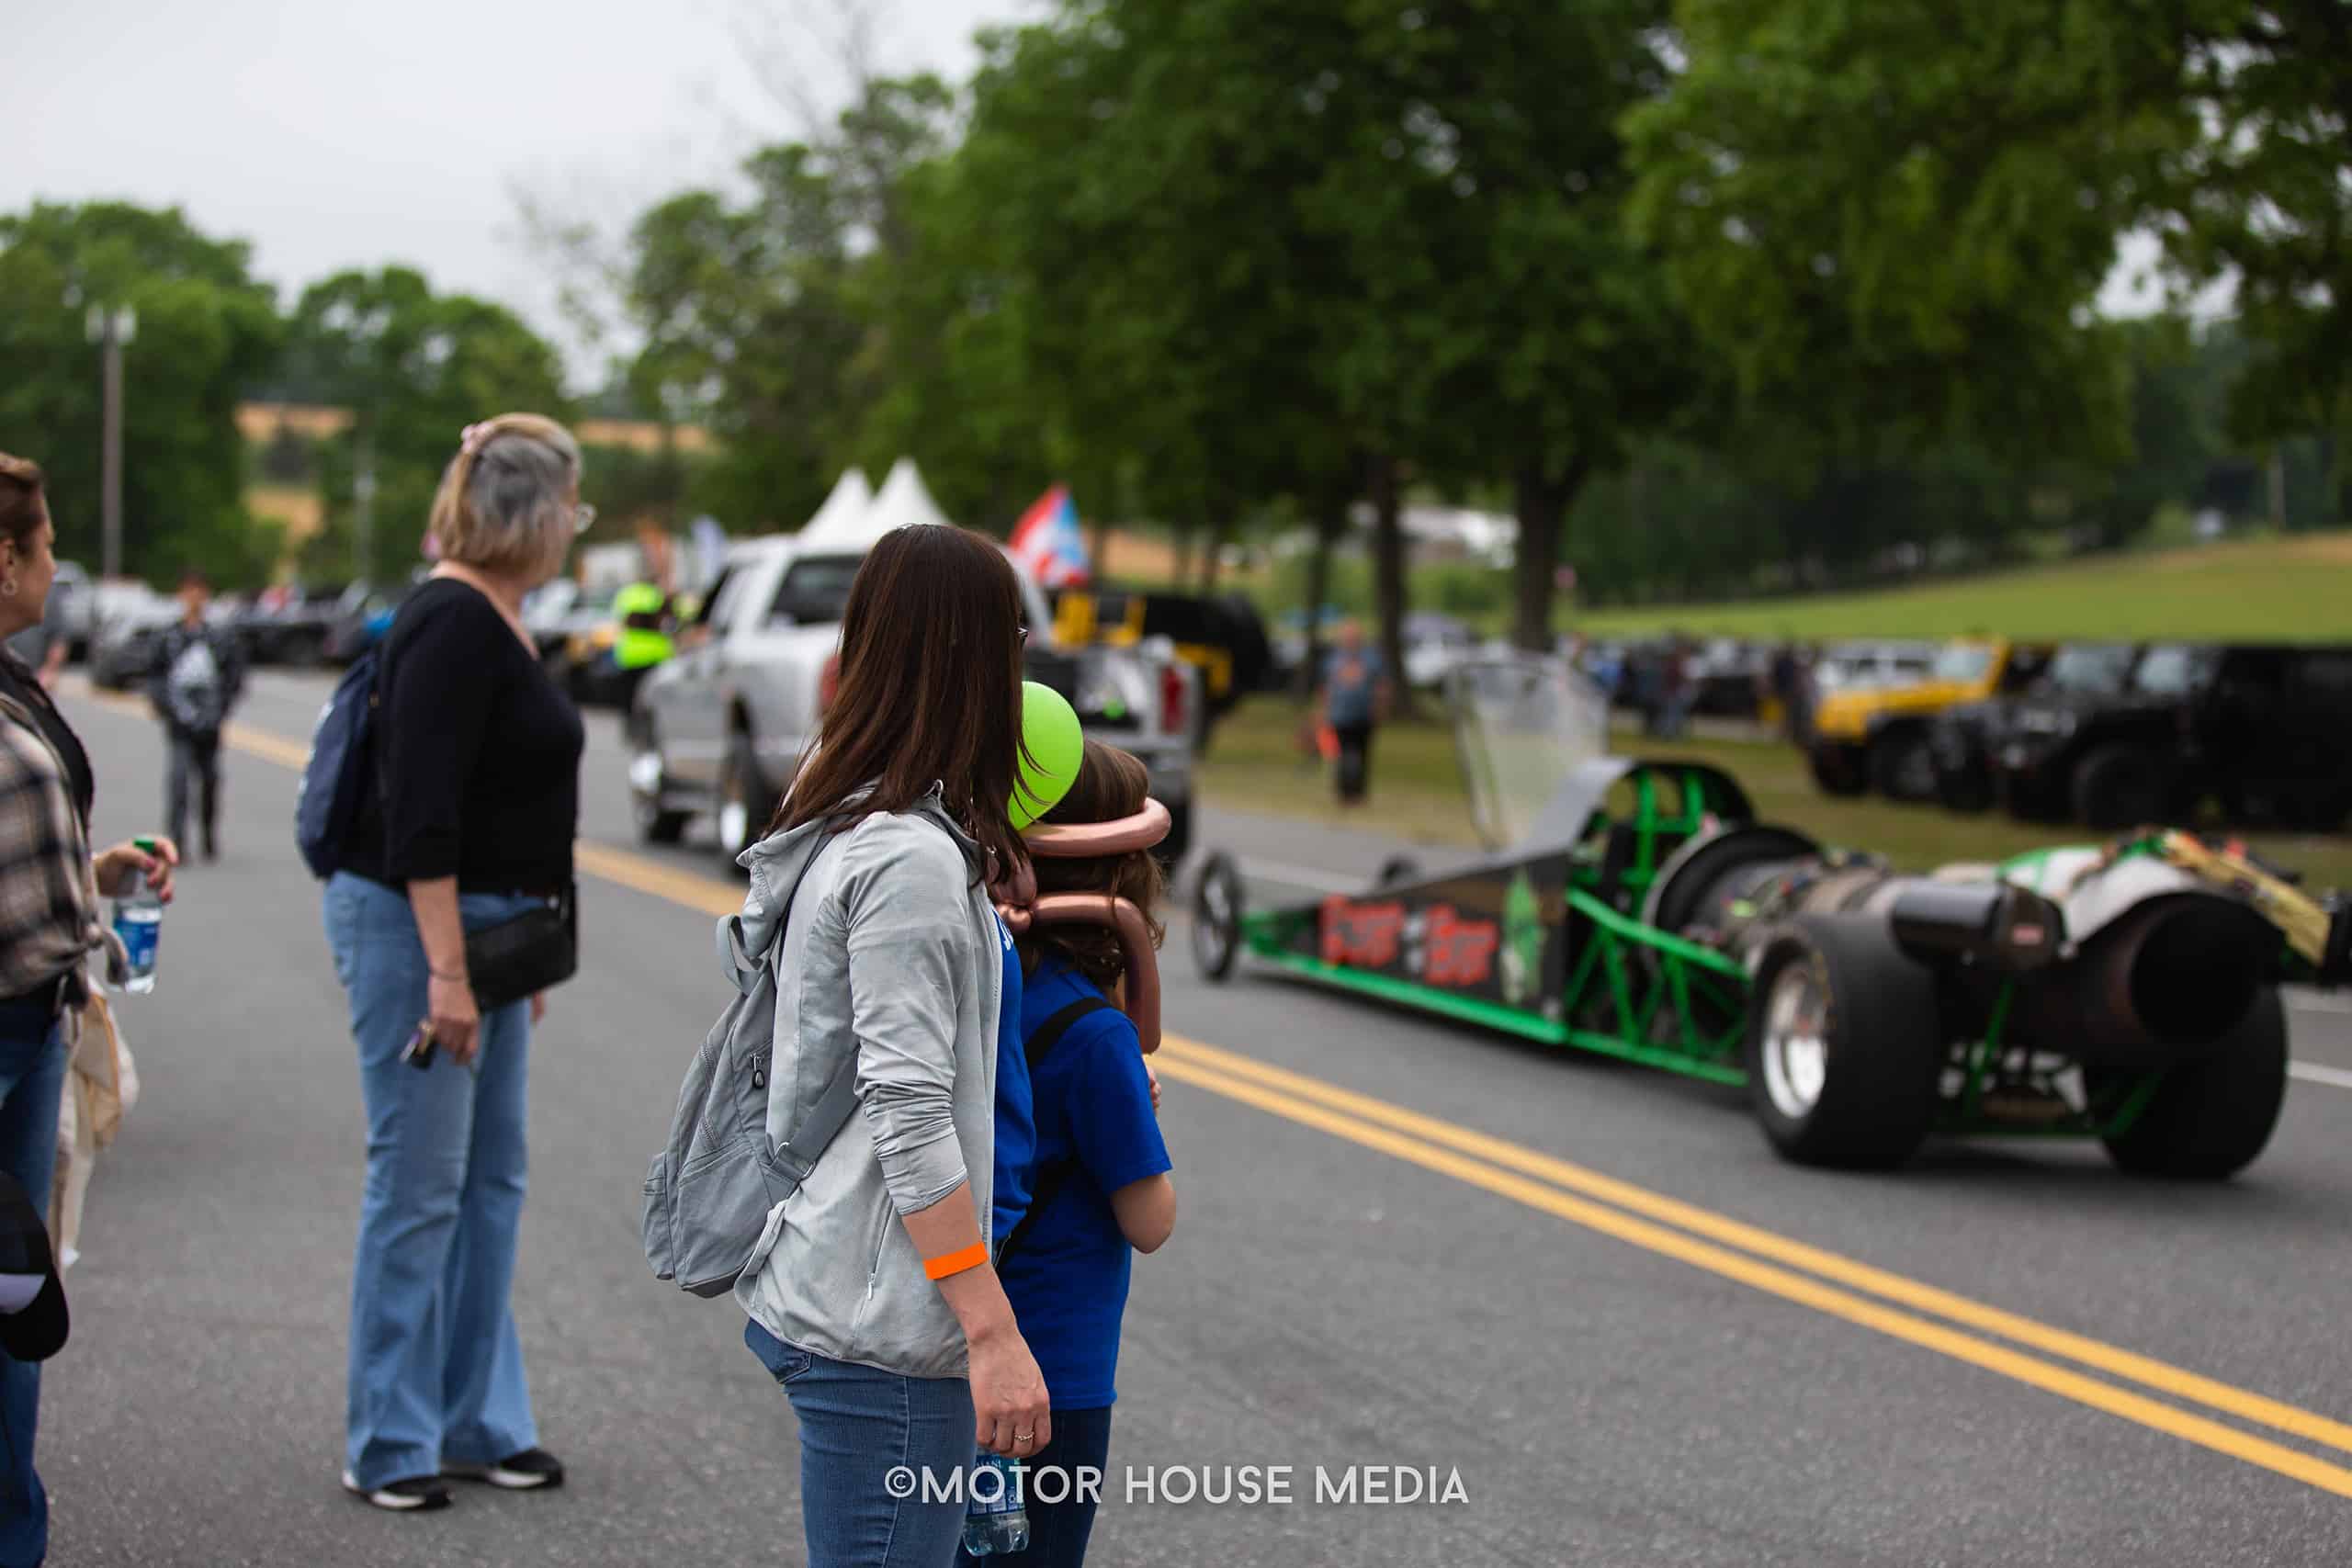 The Turn 5 auto show featuring Cars, trucks & Jeeps